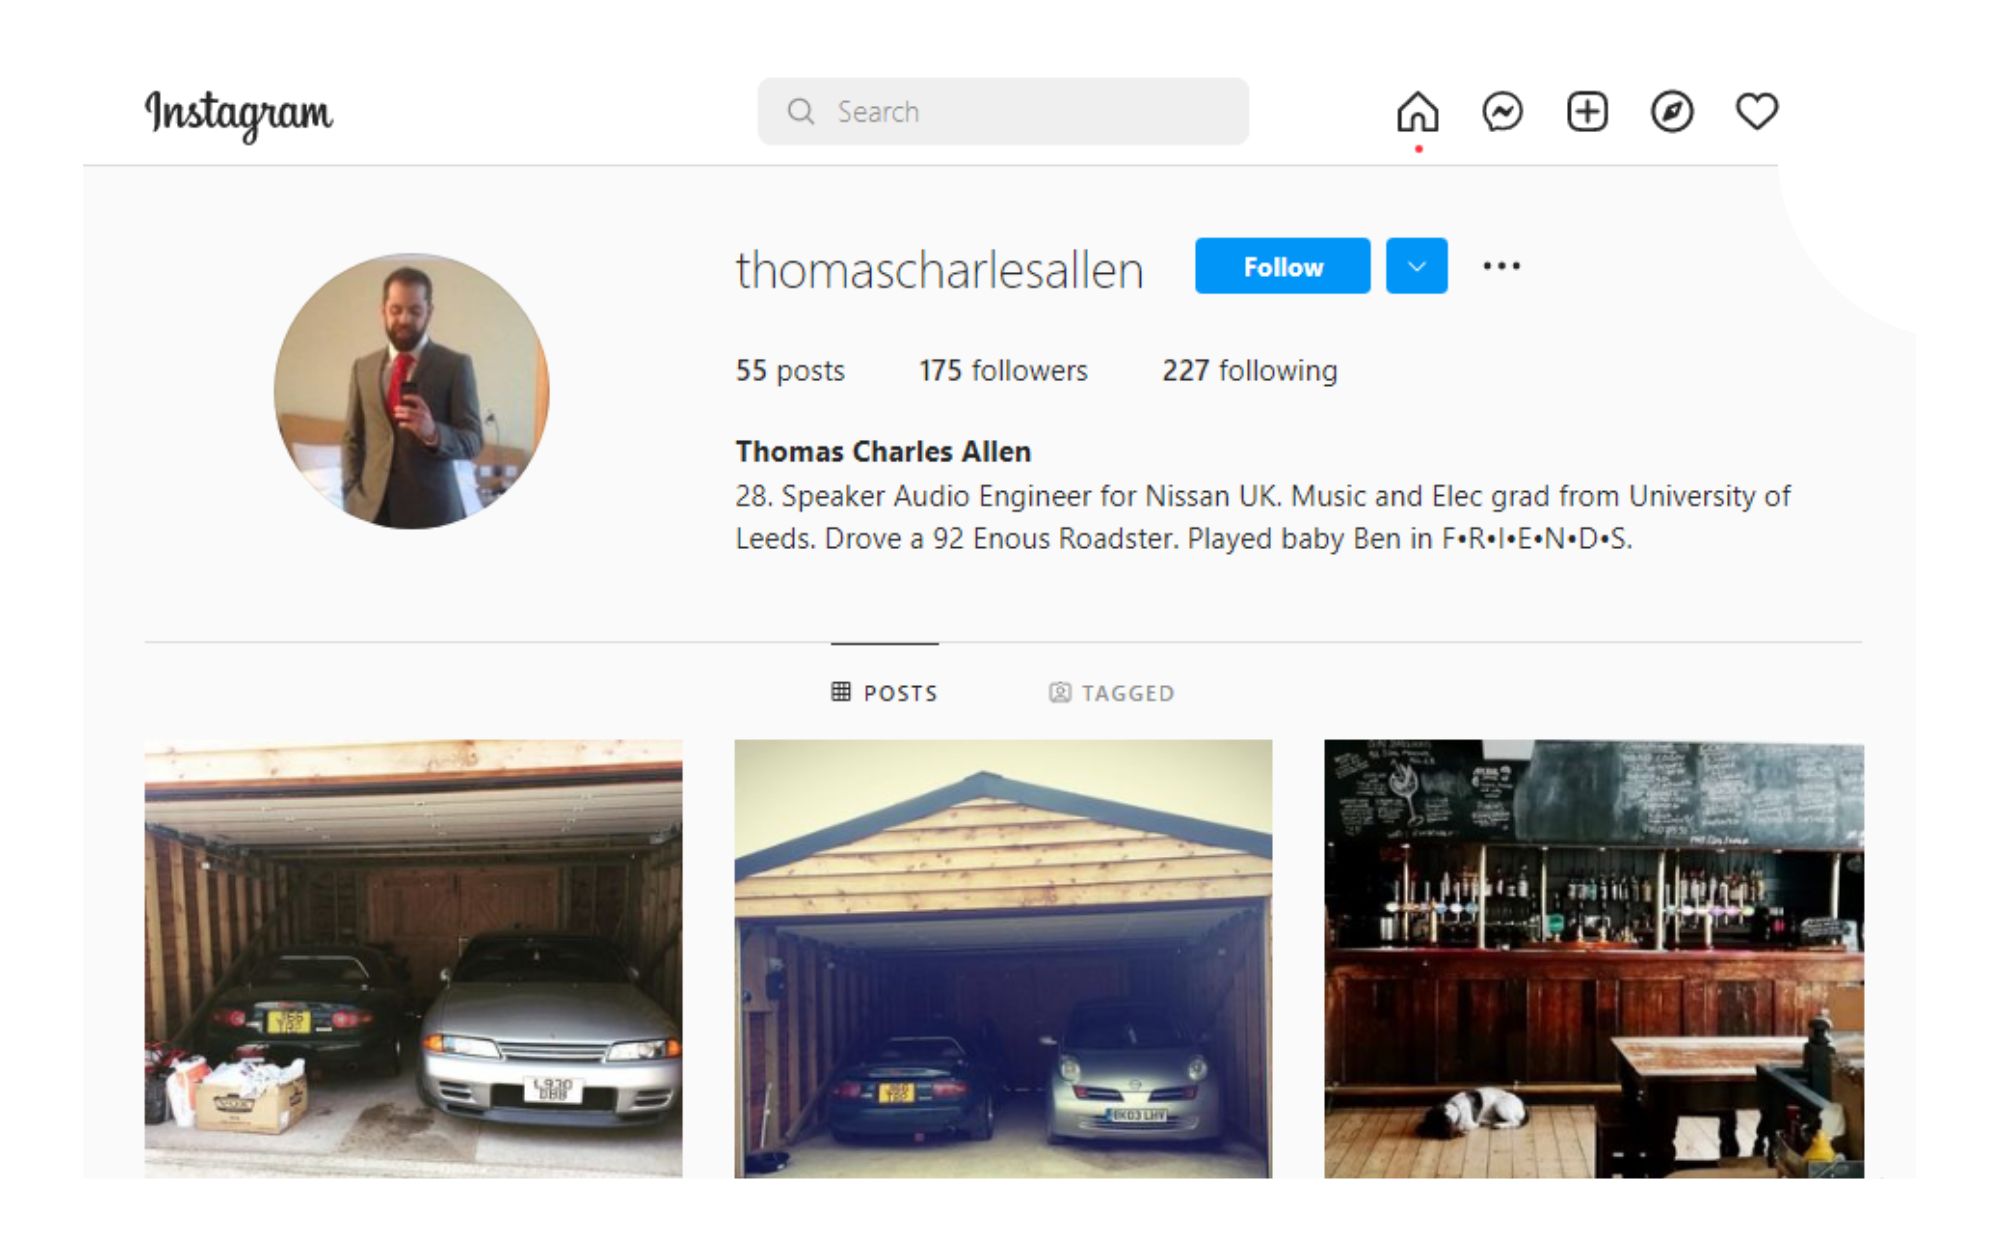 The round picture above shows Charles Thomas Allen in a formal attire, and the photos he uploaded are shown below.